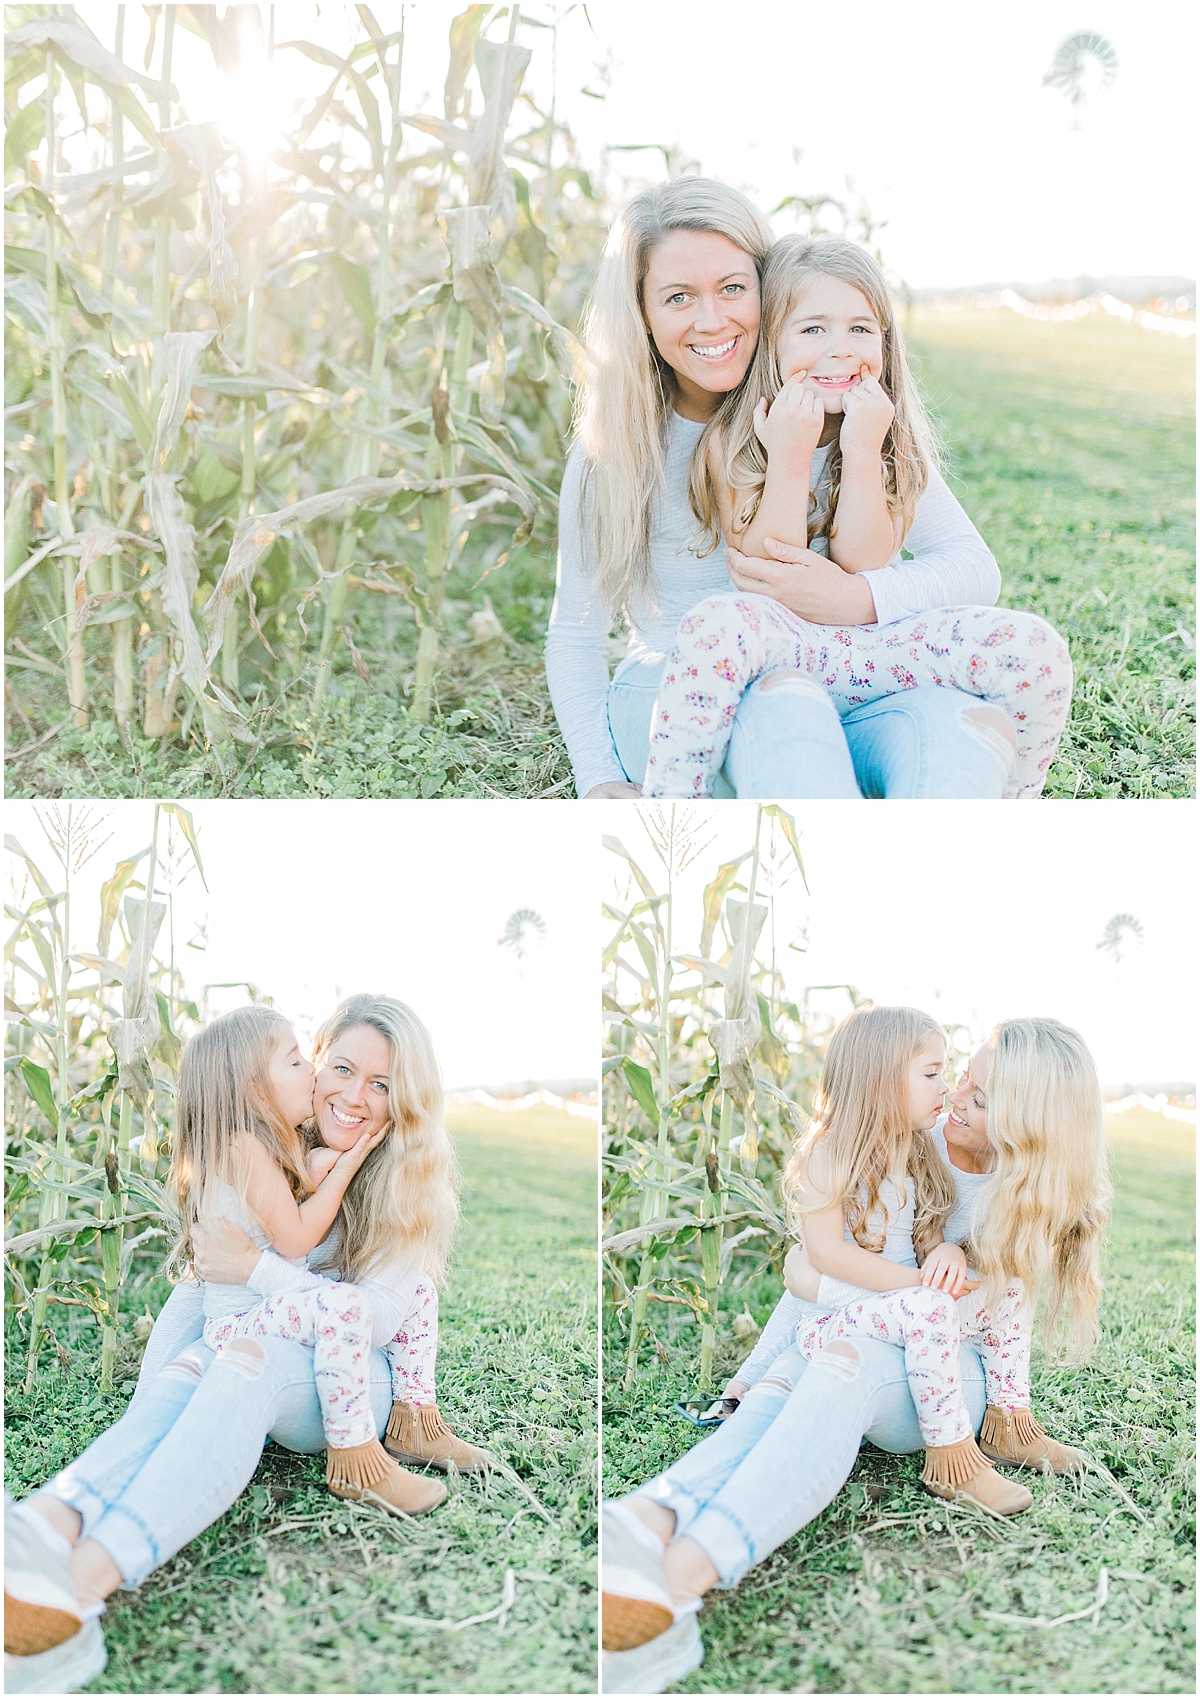 Pumpkin Patch Photo Shoot With Toddler and Mommy | Emma Rose Company Seattle Portland Light and Airy Wedding Photographer | Kindred Presets | Film_0018.jpg